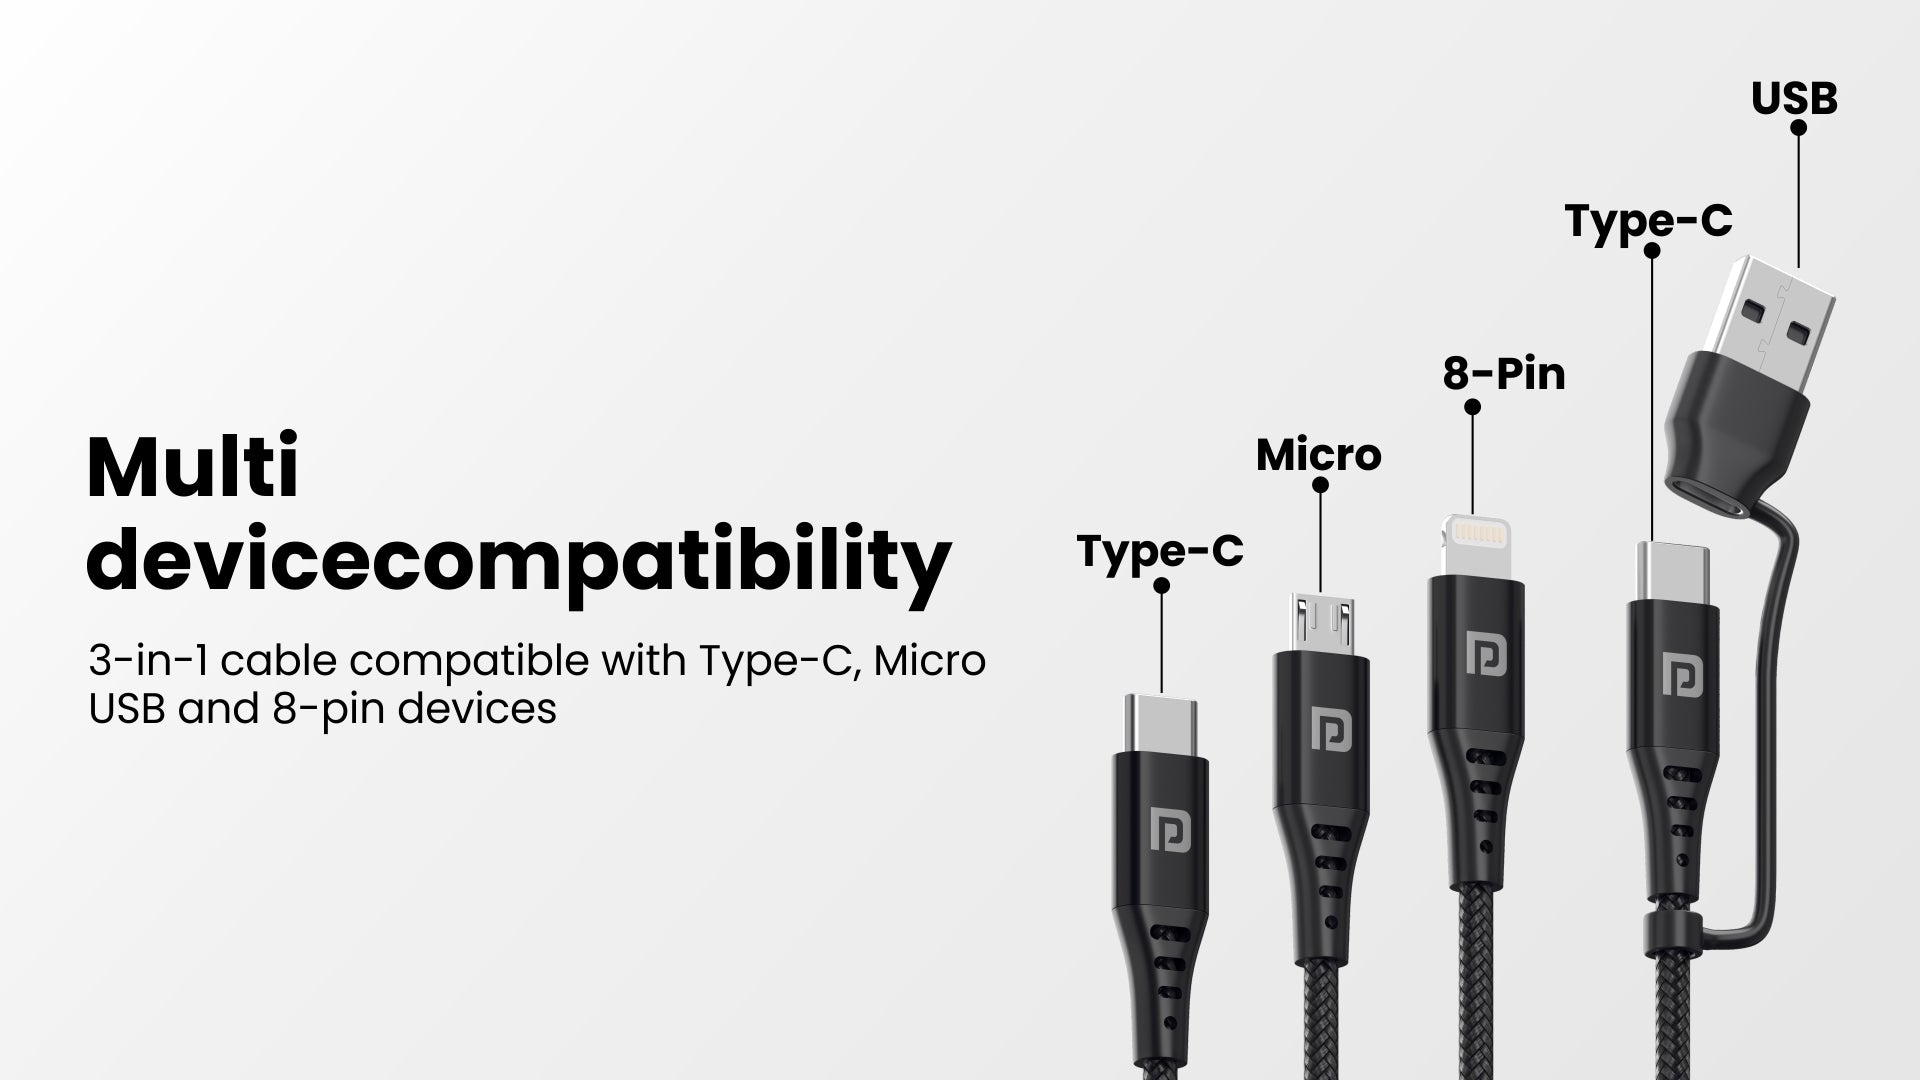 3-in-1 cable compatible with Type-C, Micro USB and 8-pin devices